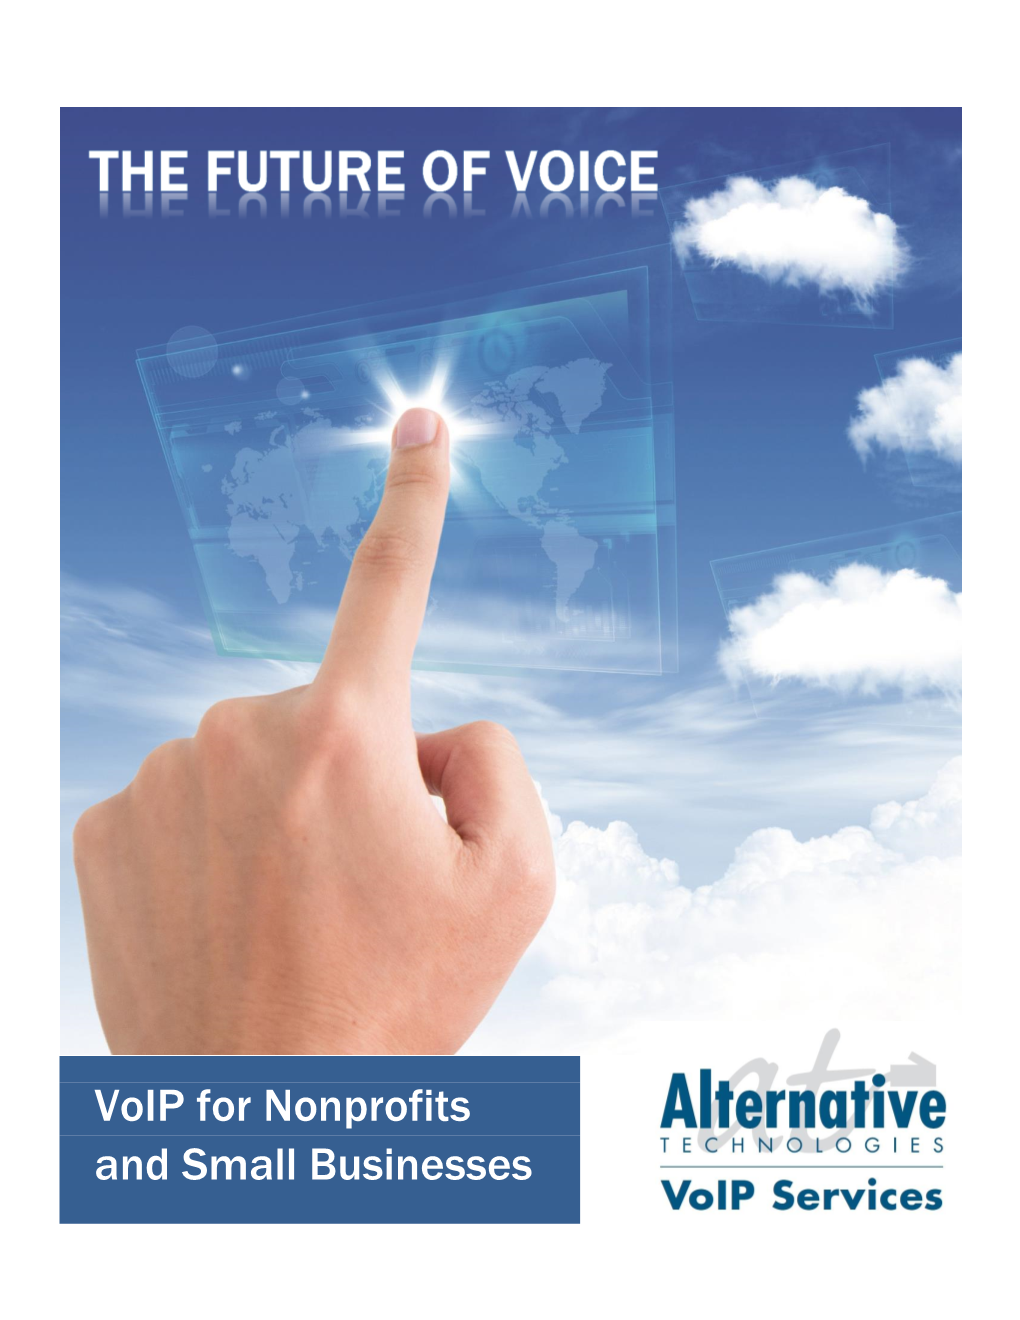 Voip for Nonprofits and Small Businesses